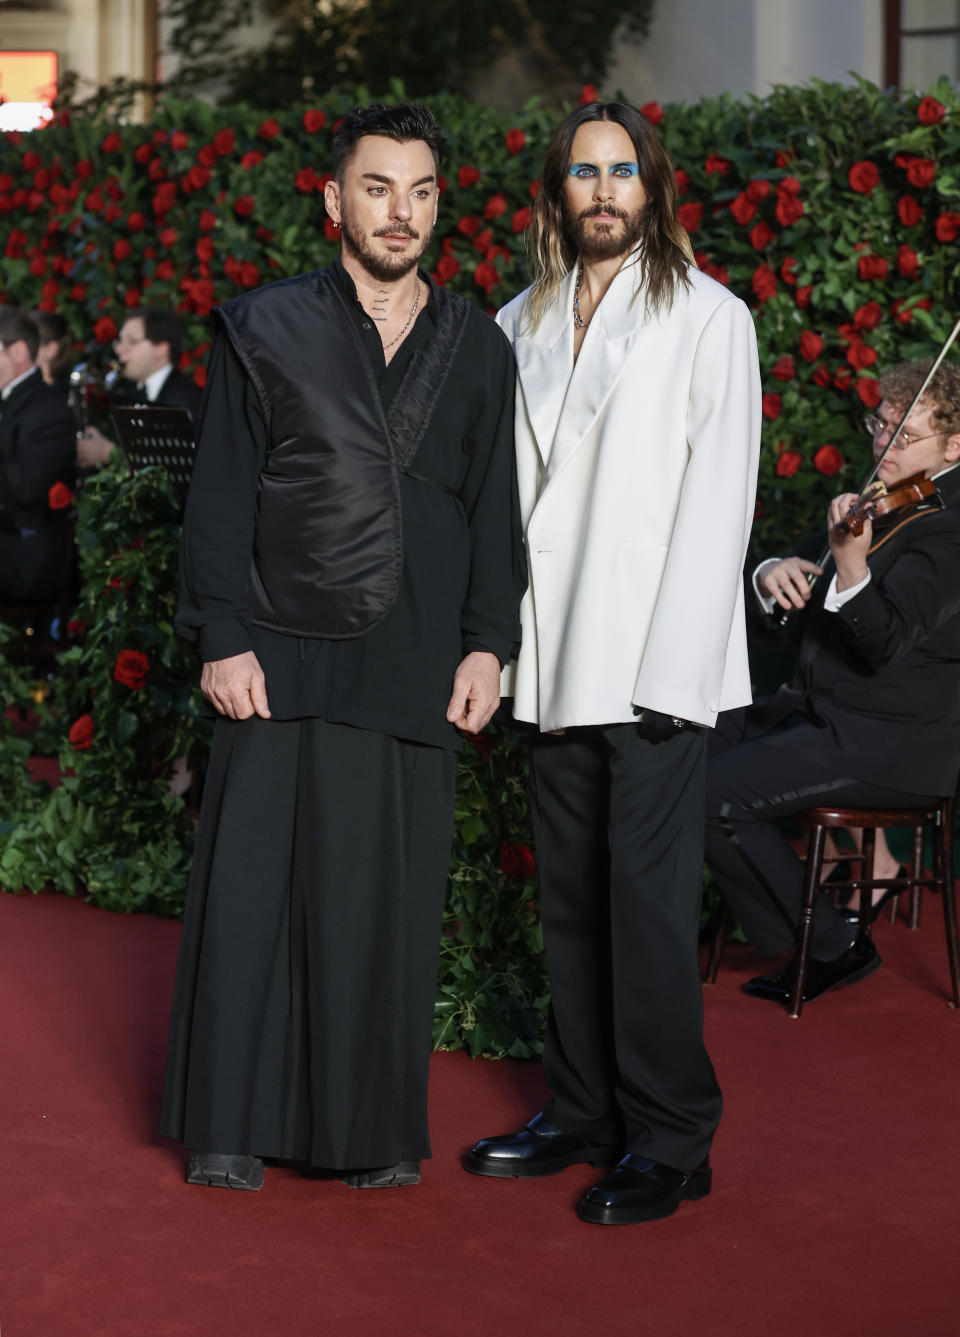 shannon wearing a long skirt and long-sleeved top and jared wearing dark pants and an oversized blazer